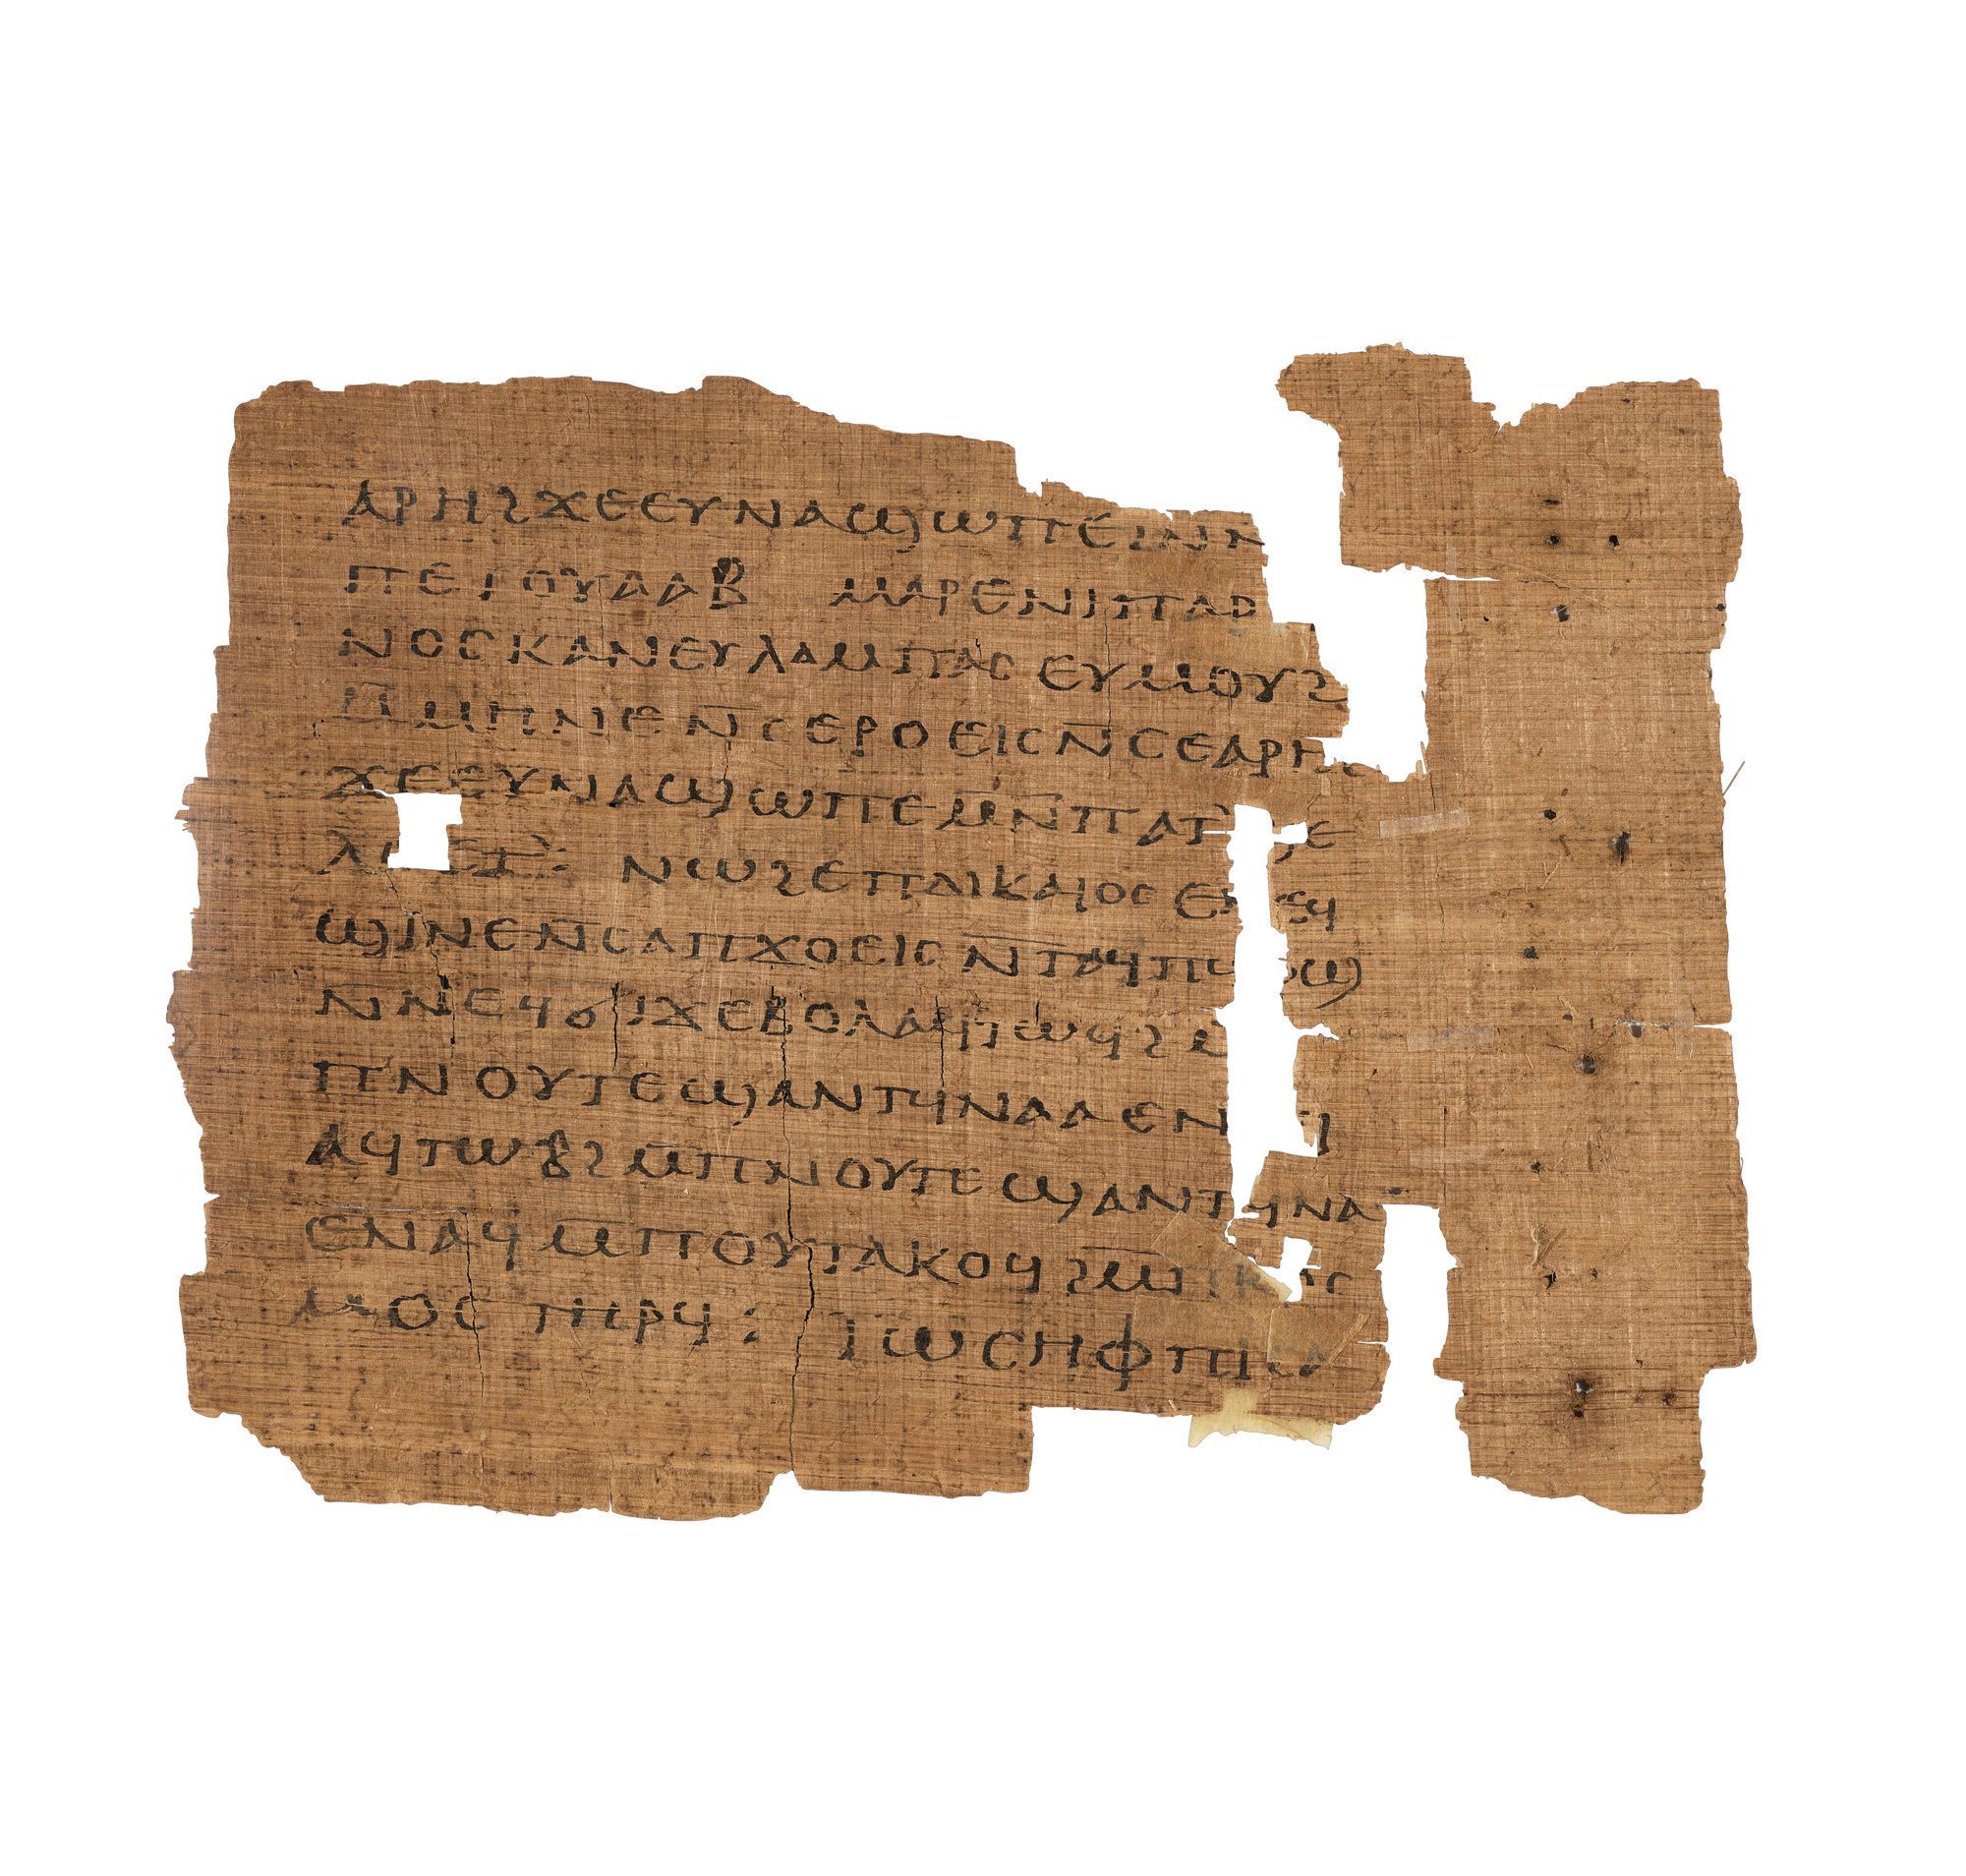 Some of the "pages" are fragmented, but the condition of the codex is otherwise "exceptional," according to Christie's.